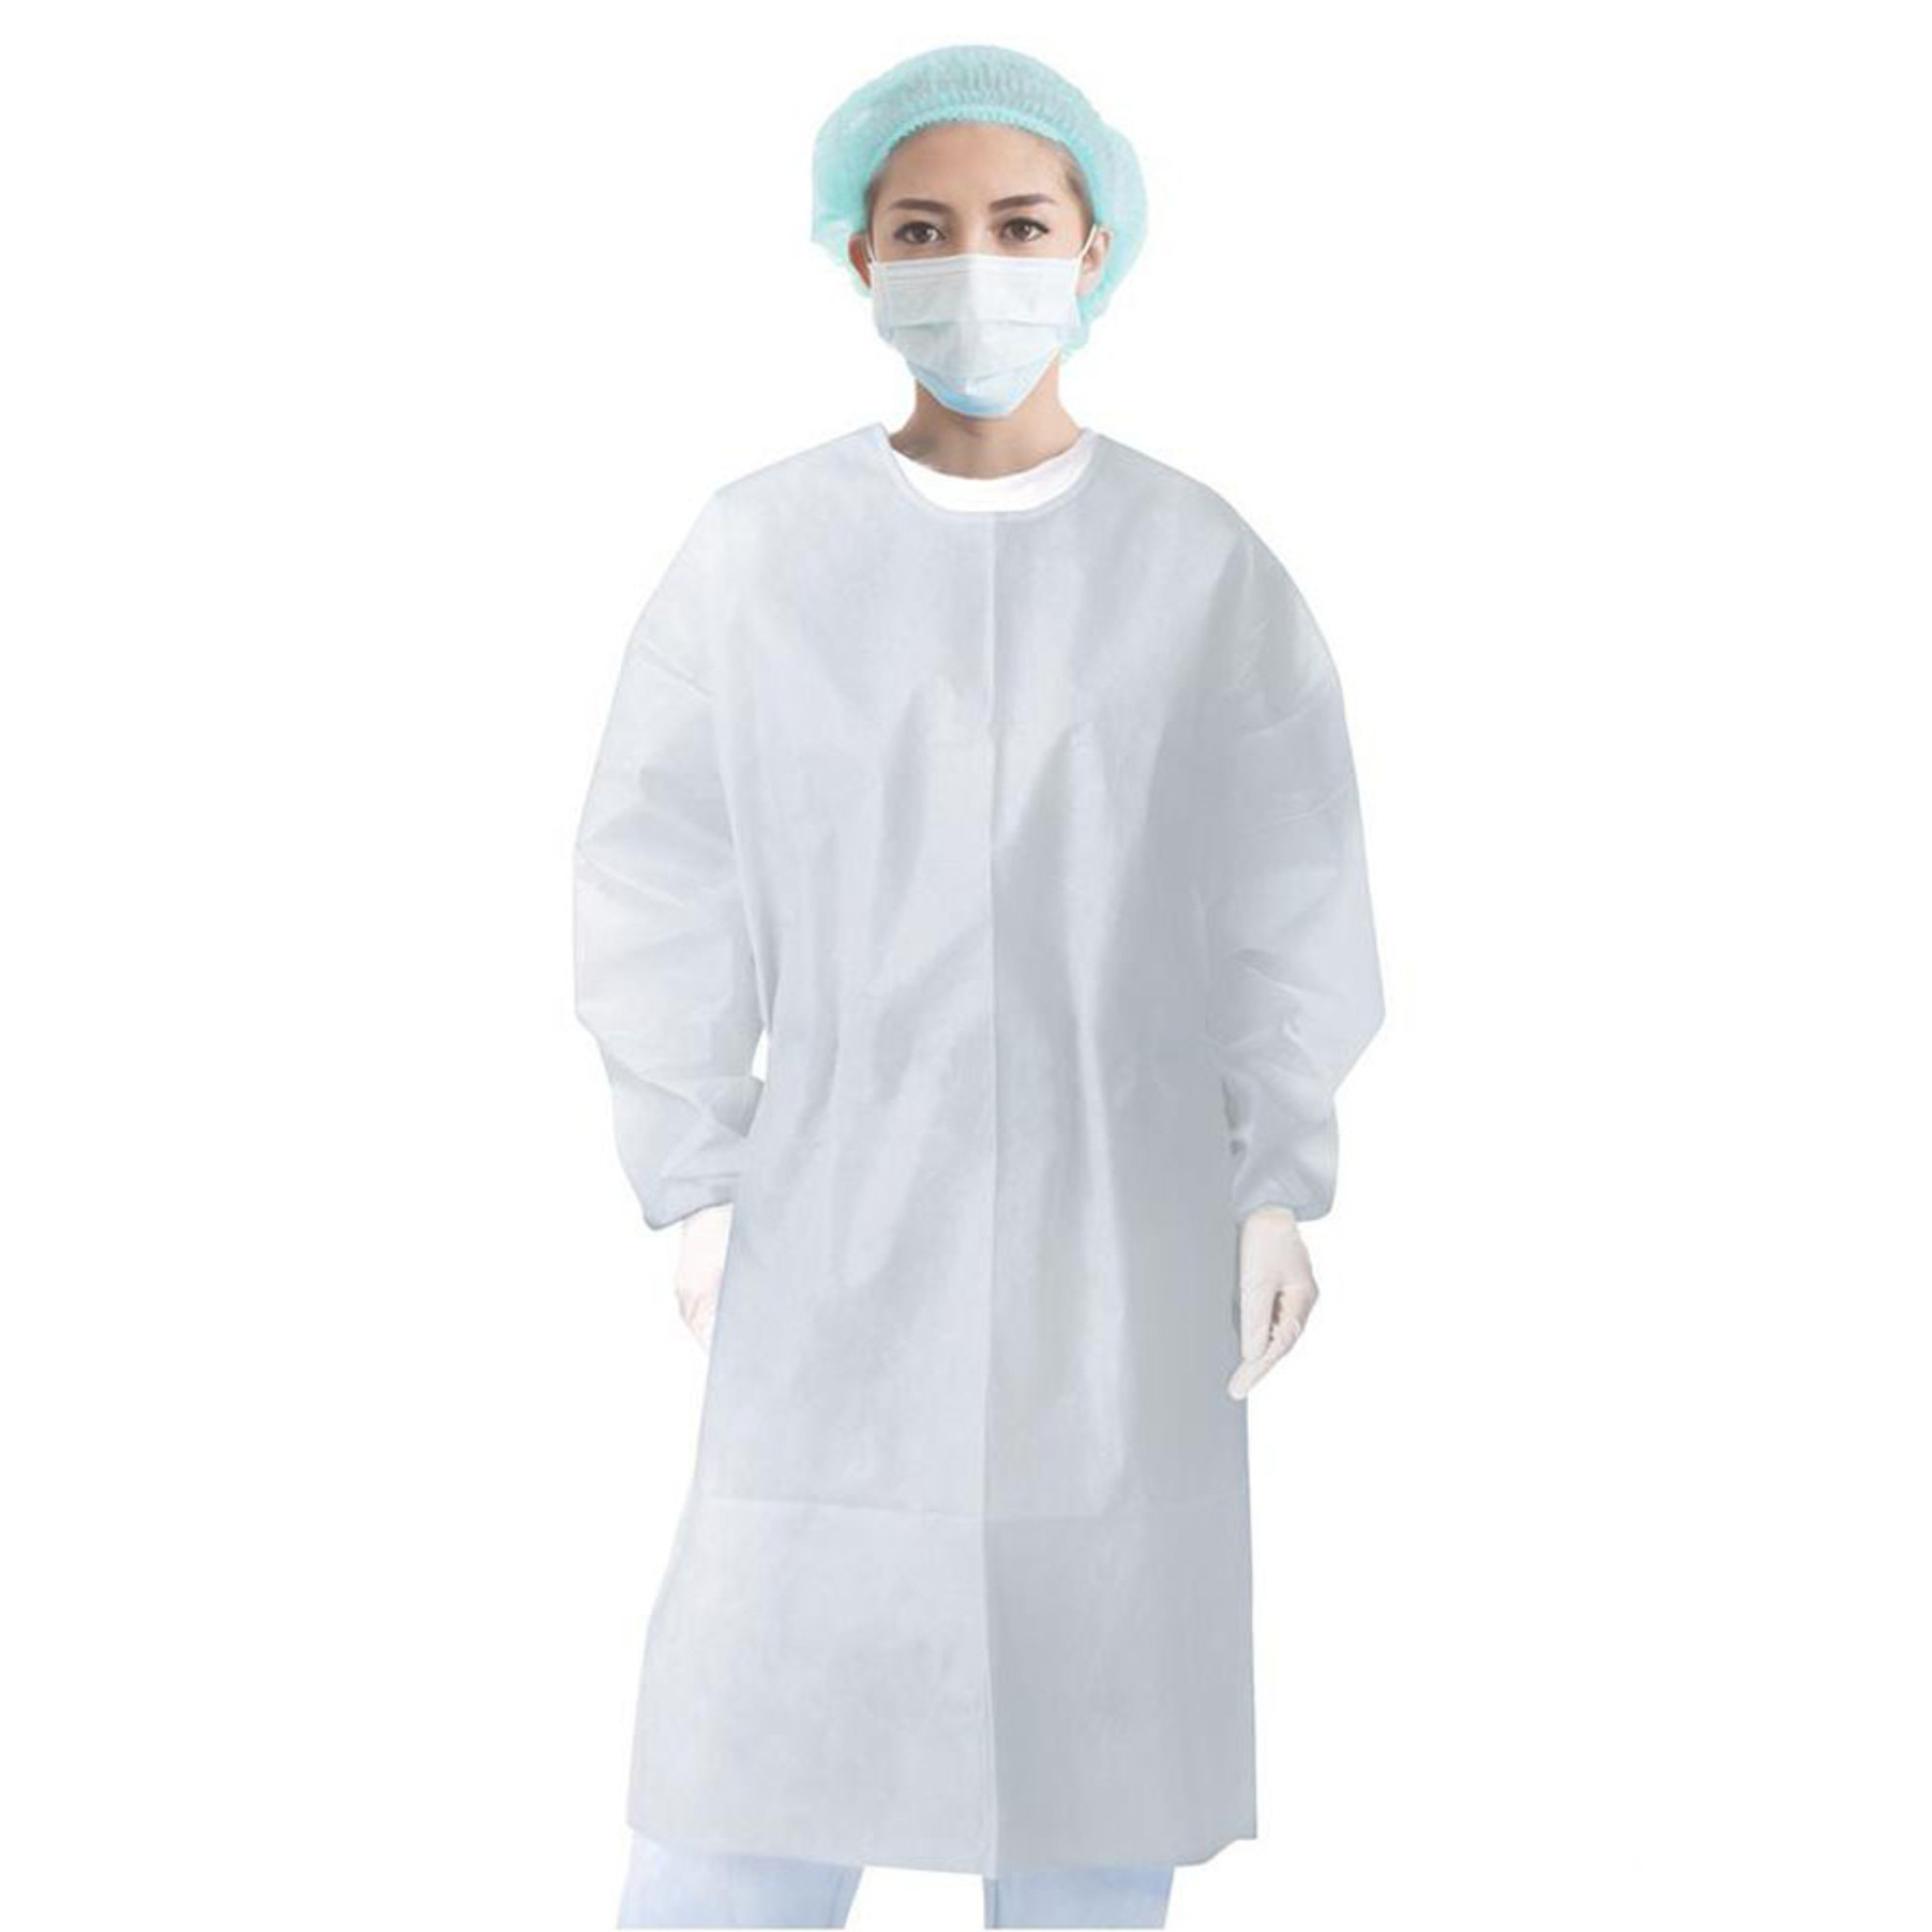 EVCR Level 1 Isolation Surgical PPE Gown